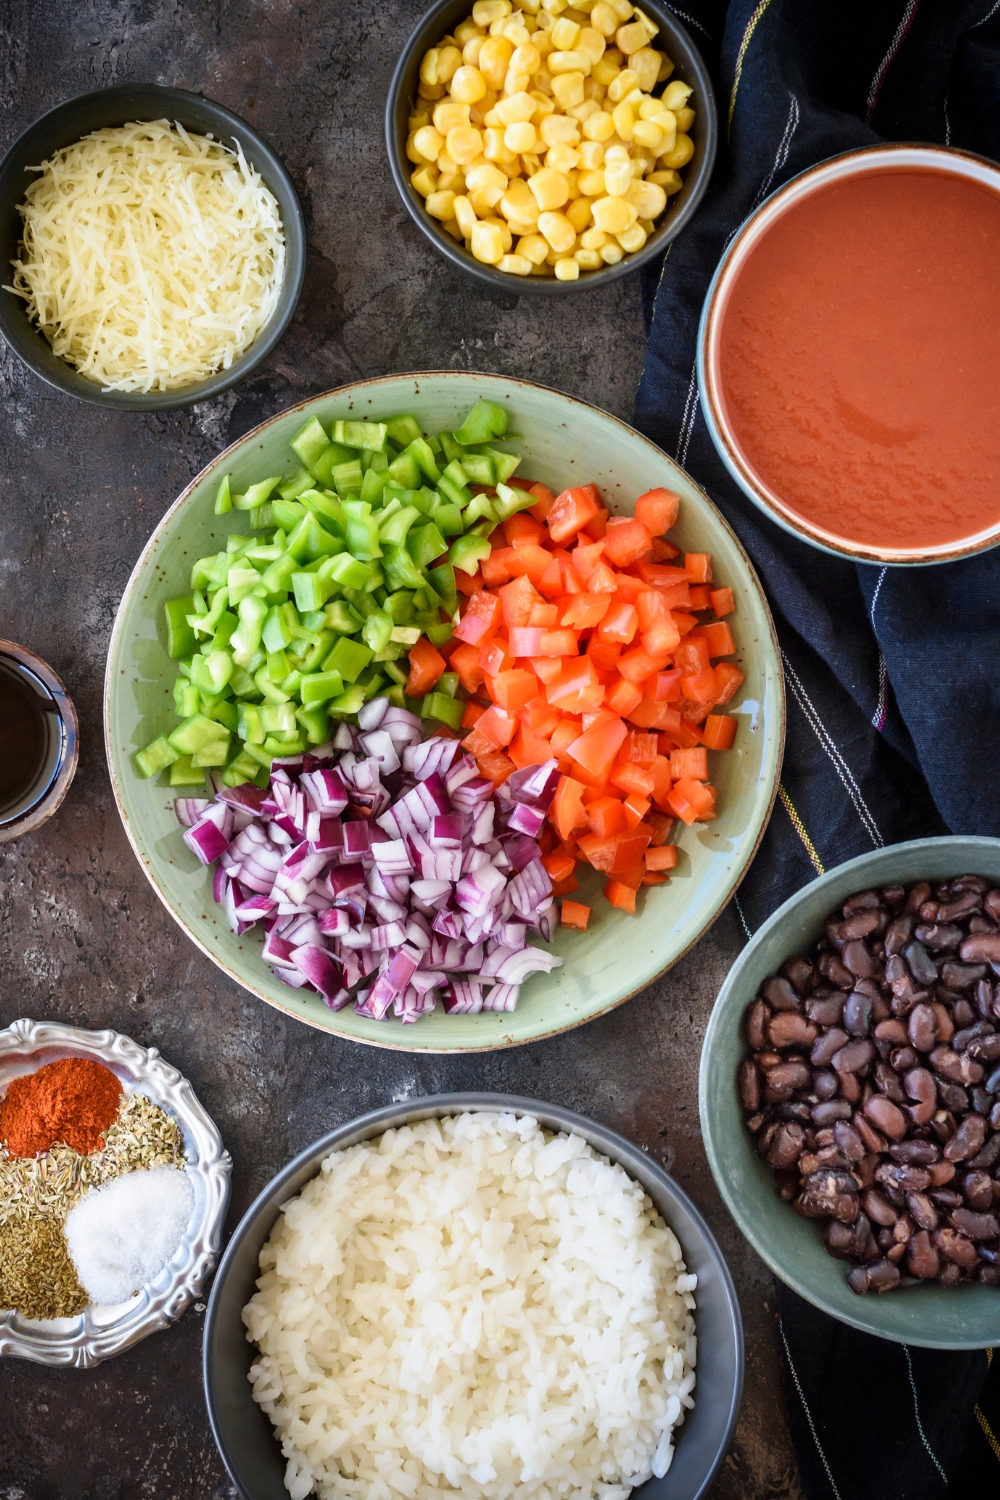 An assortment of ingredients including a bowl of diced peppers and red onion next to bowls of corn, red sauce, white rice, black beans, and shredded cheese.